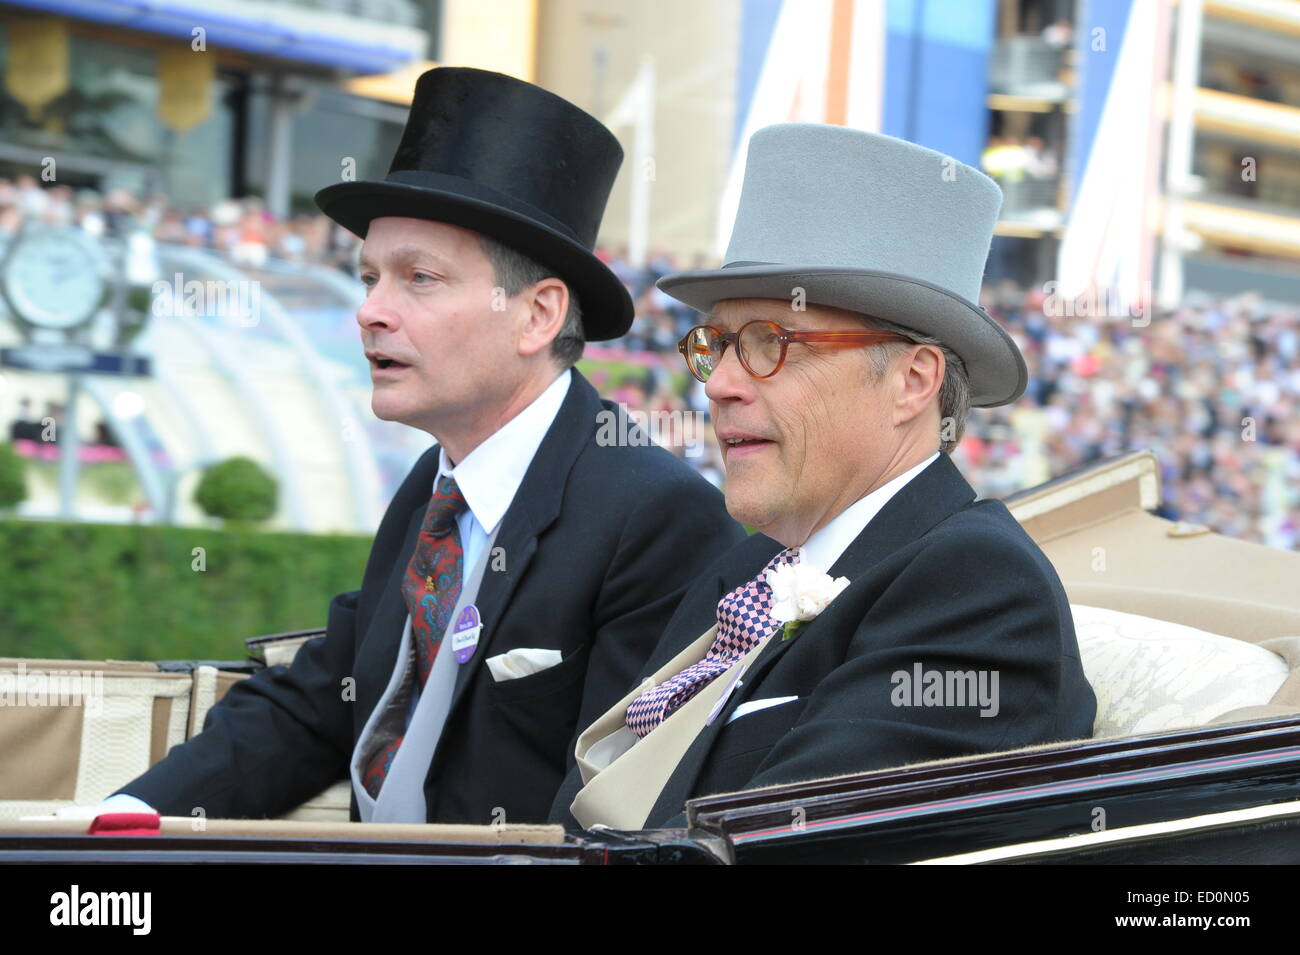 Royal Ascot 2014 - Royal Arrivals - Day 4 - Coronation Stakes  Featuring: Earl of March,Daniel Chatto Where: Ascot, United Kingdom When: 20 Jun 2014 Stock Photo